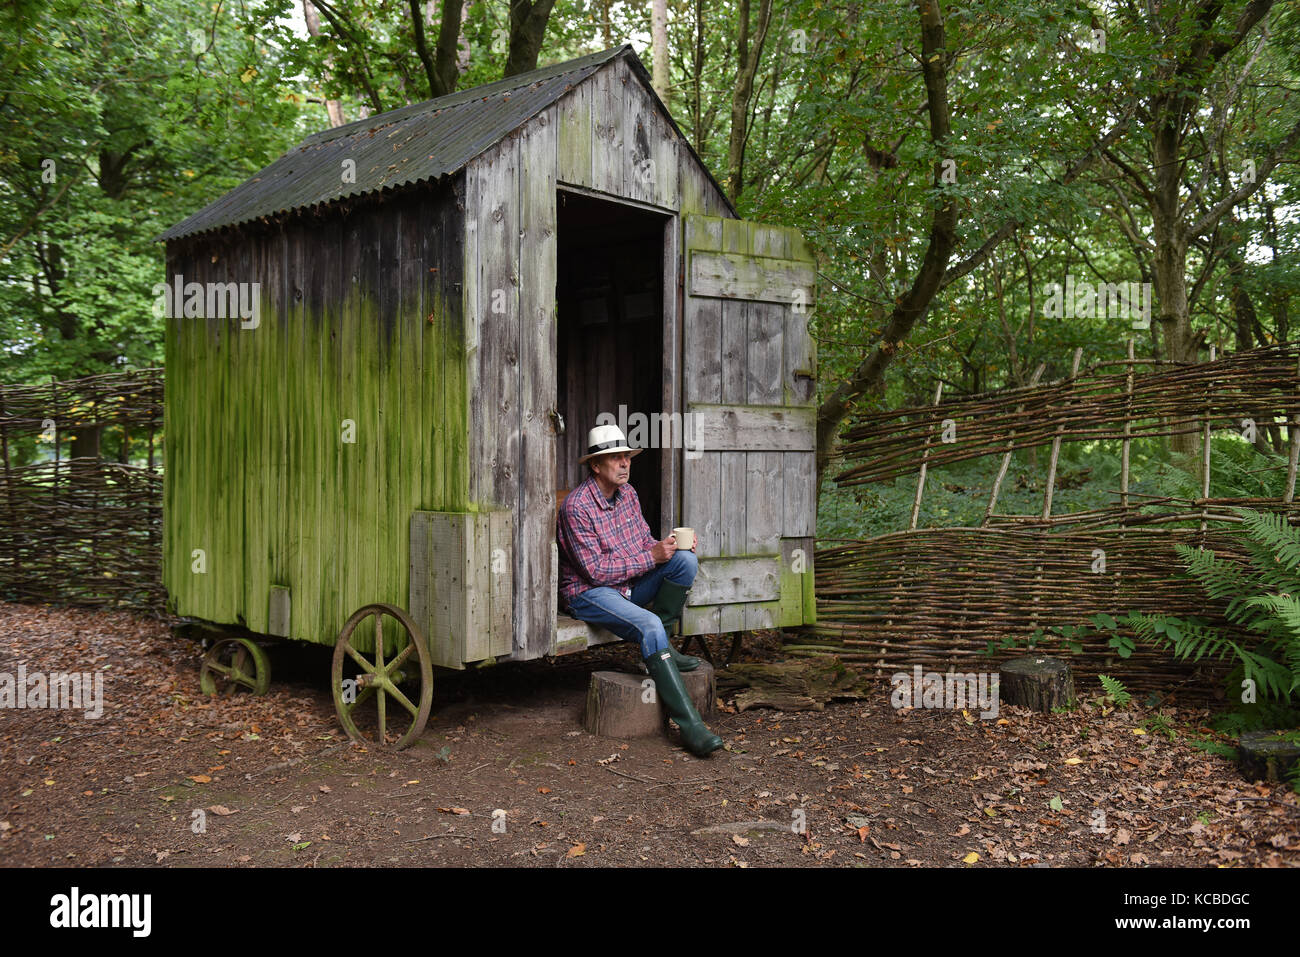 Man relaxing at woodland garden shed on wheels Britain Uk secluded seclusion isolation hideaway rural retreat Stock Photo